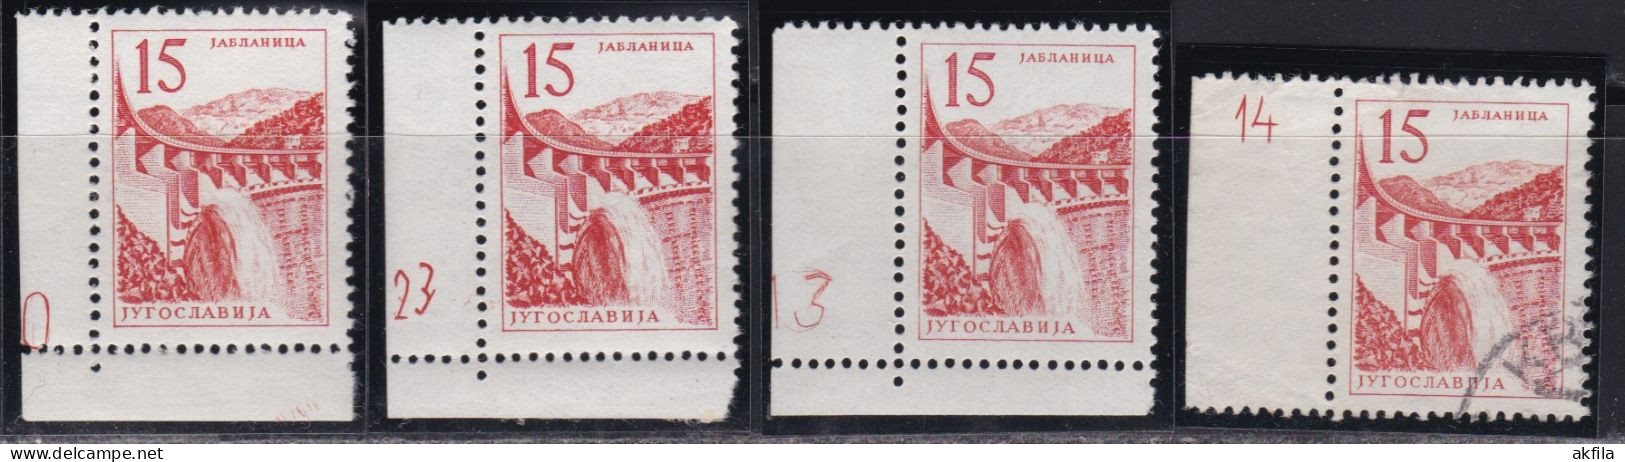 Yugoslavia 1958 Definitive Stamps With Printing Plate Markings, MNH And Used Michel 857. - Gebraucht